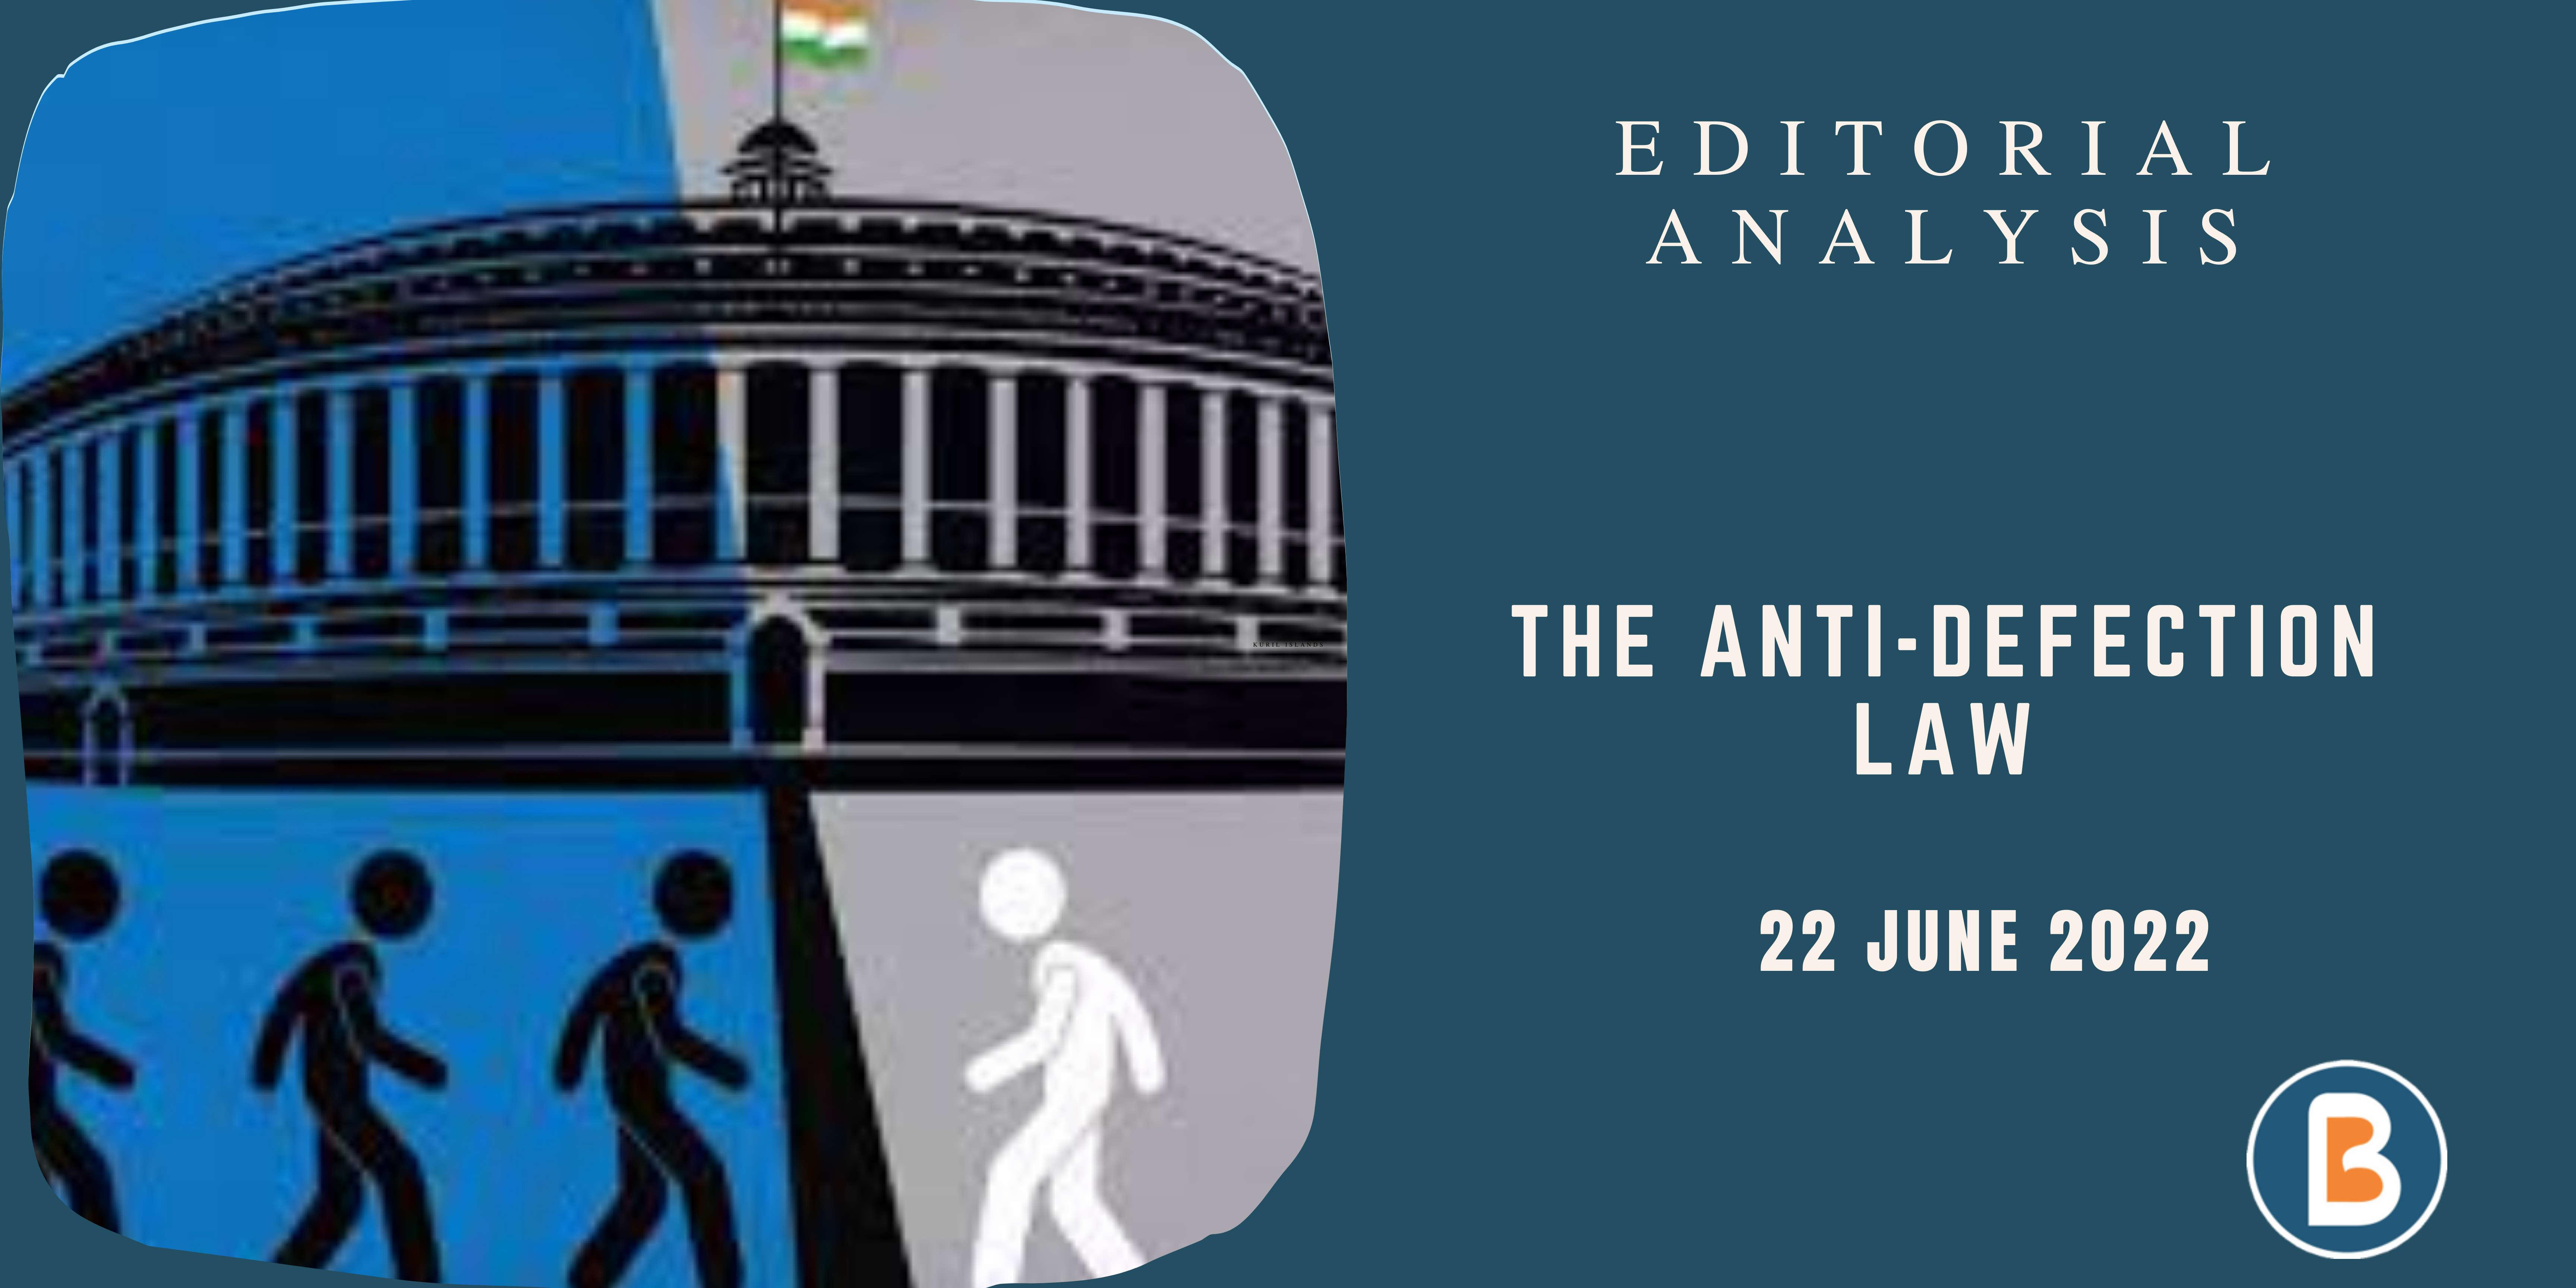 Editorial Analysis for UPSC - The Anti-Defection Law